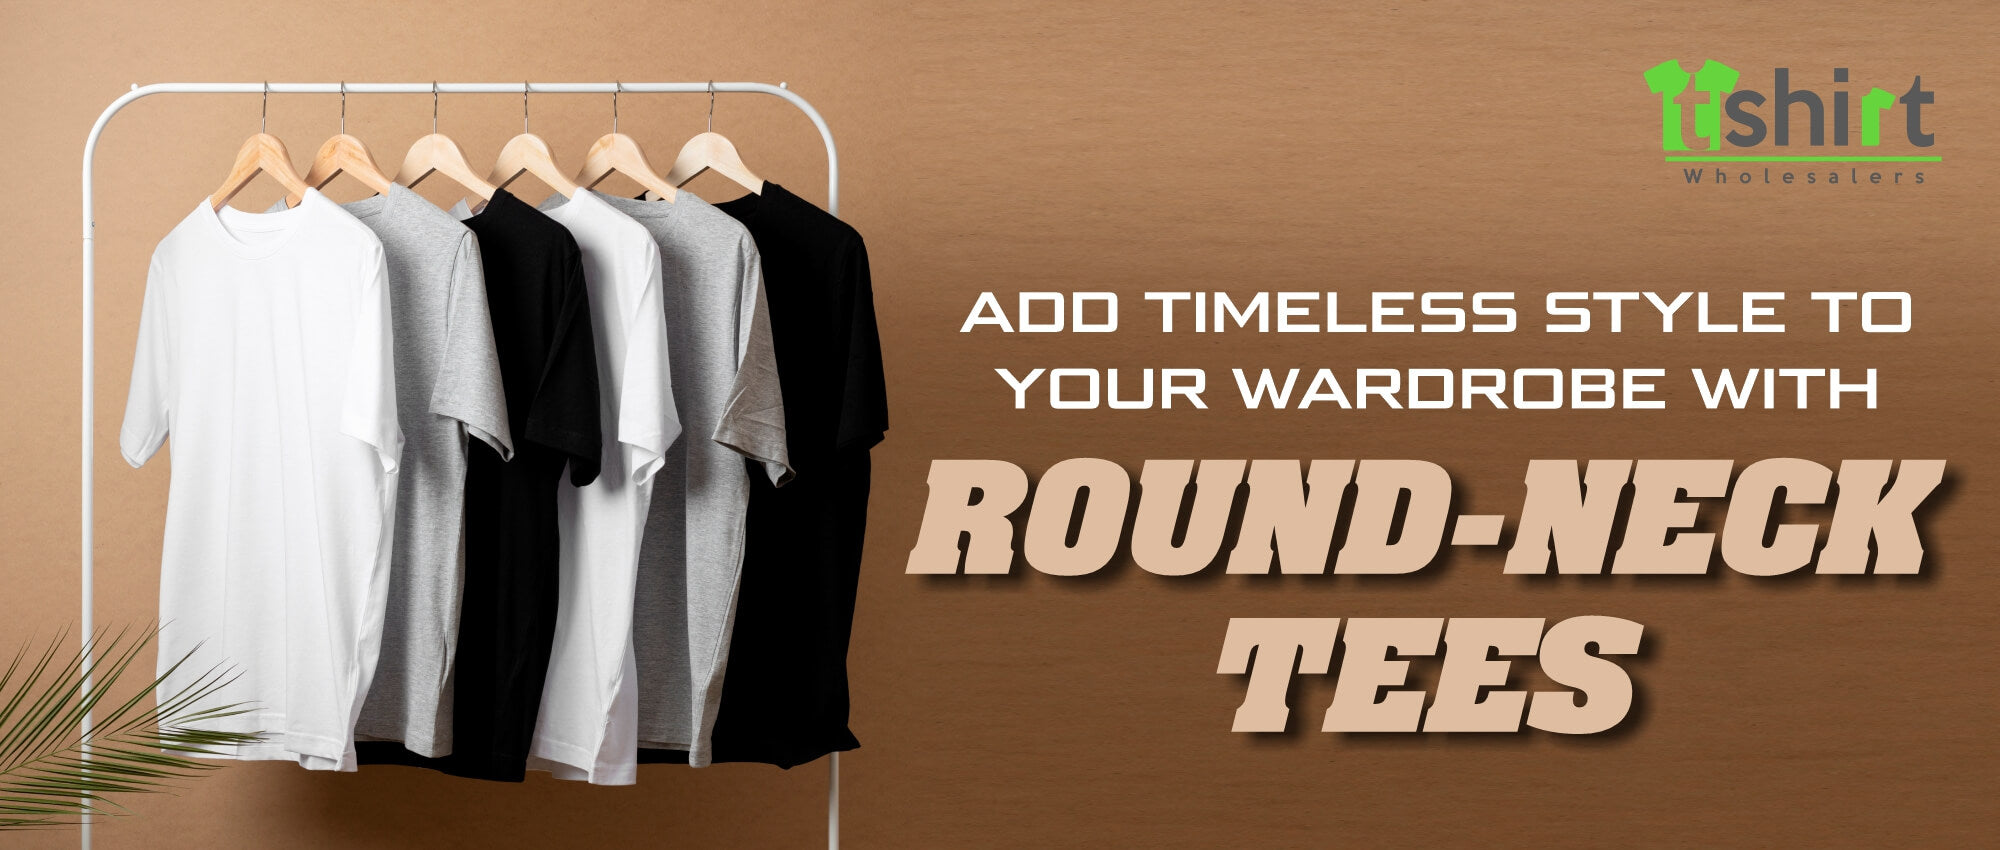 ADD TIMELESS STYLE TO YOUR WARDROBE WITH ROUND-NECK TEES